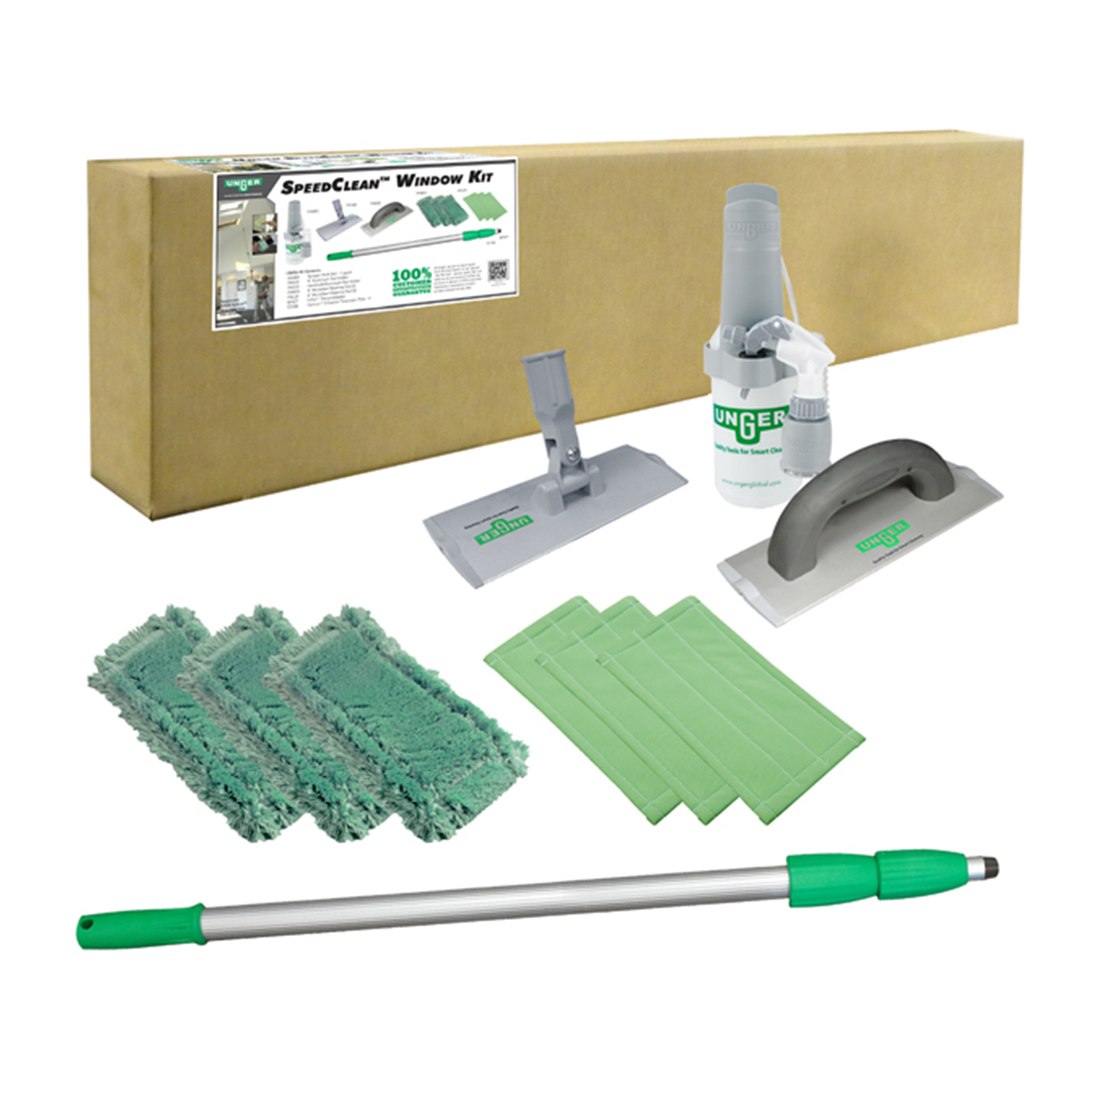 Unger SpeedClean Window Kit - Sprayer on a Belt, Pad Holder, Washing Pads, Cleaning Pads, 3-Section Pole - Box Top Kit View